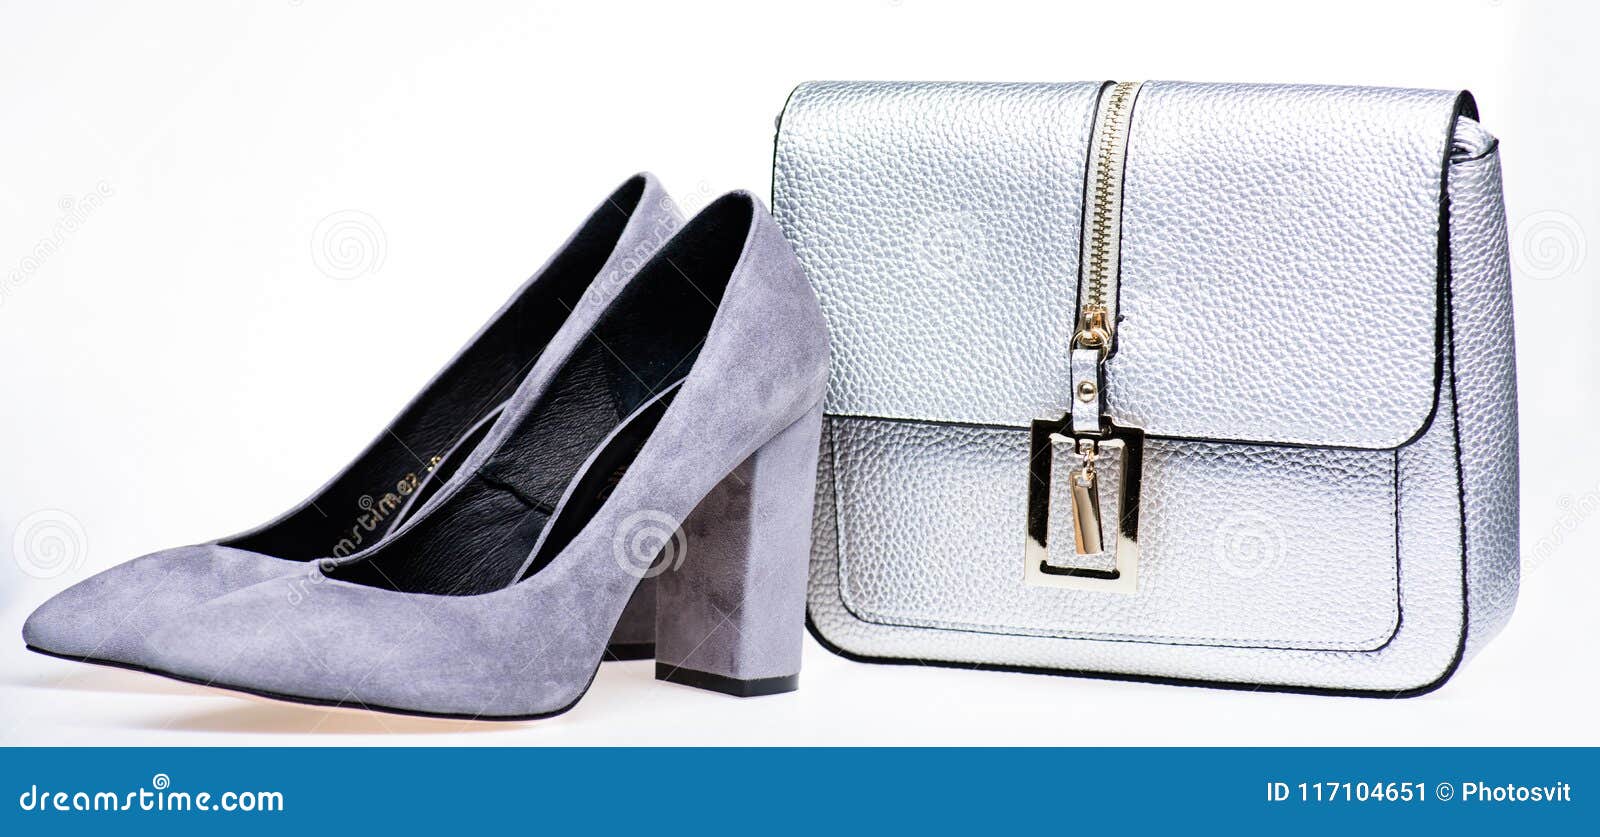 Should you always match your purse to your shoes? - Quora